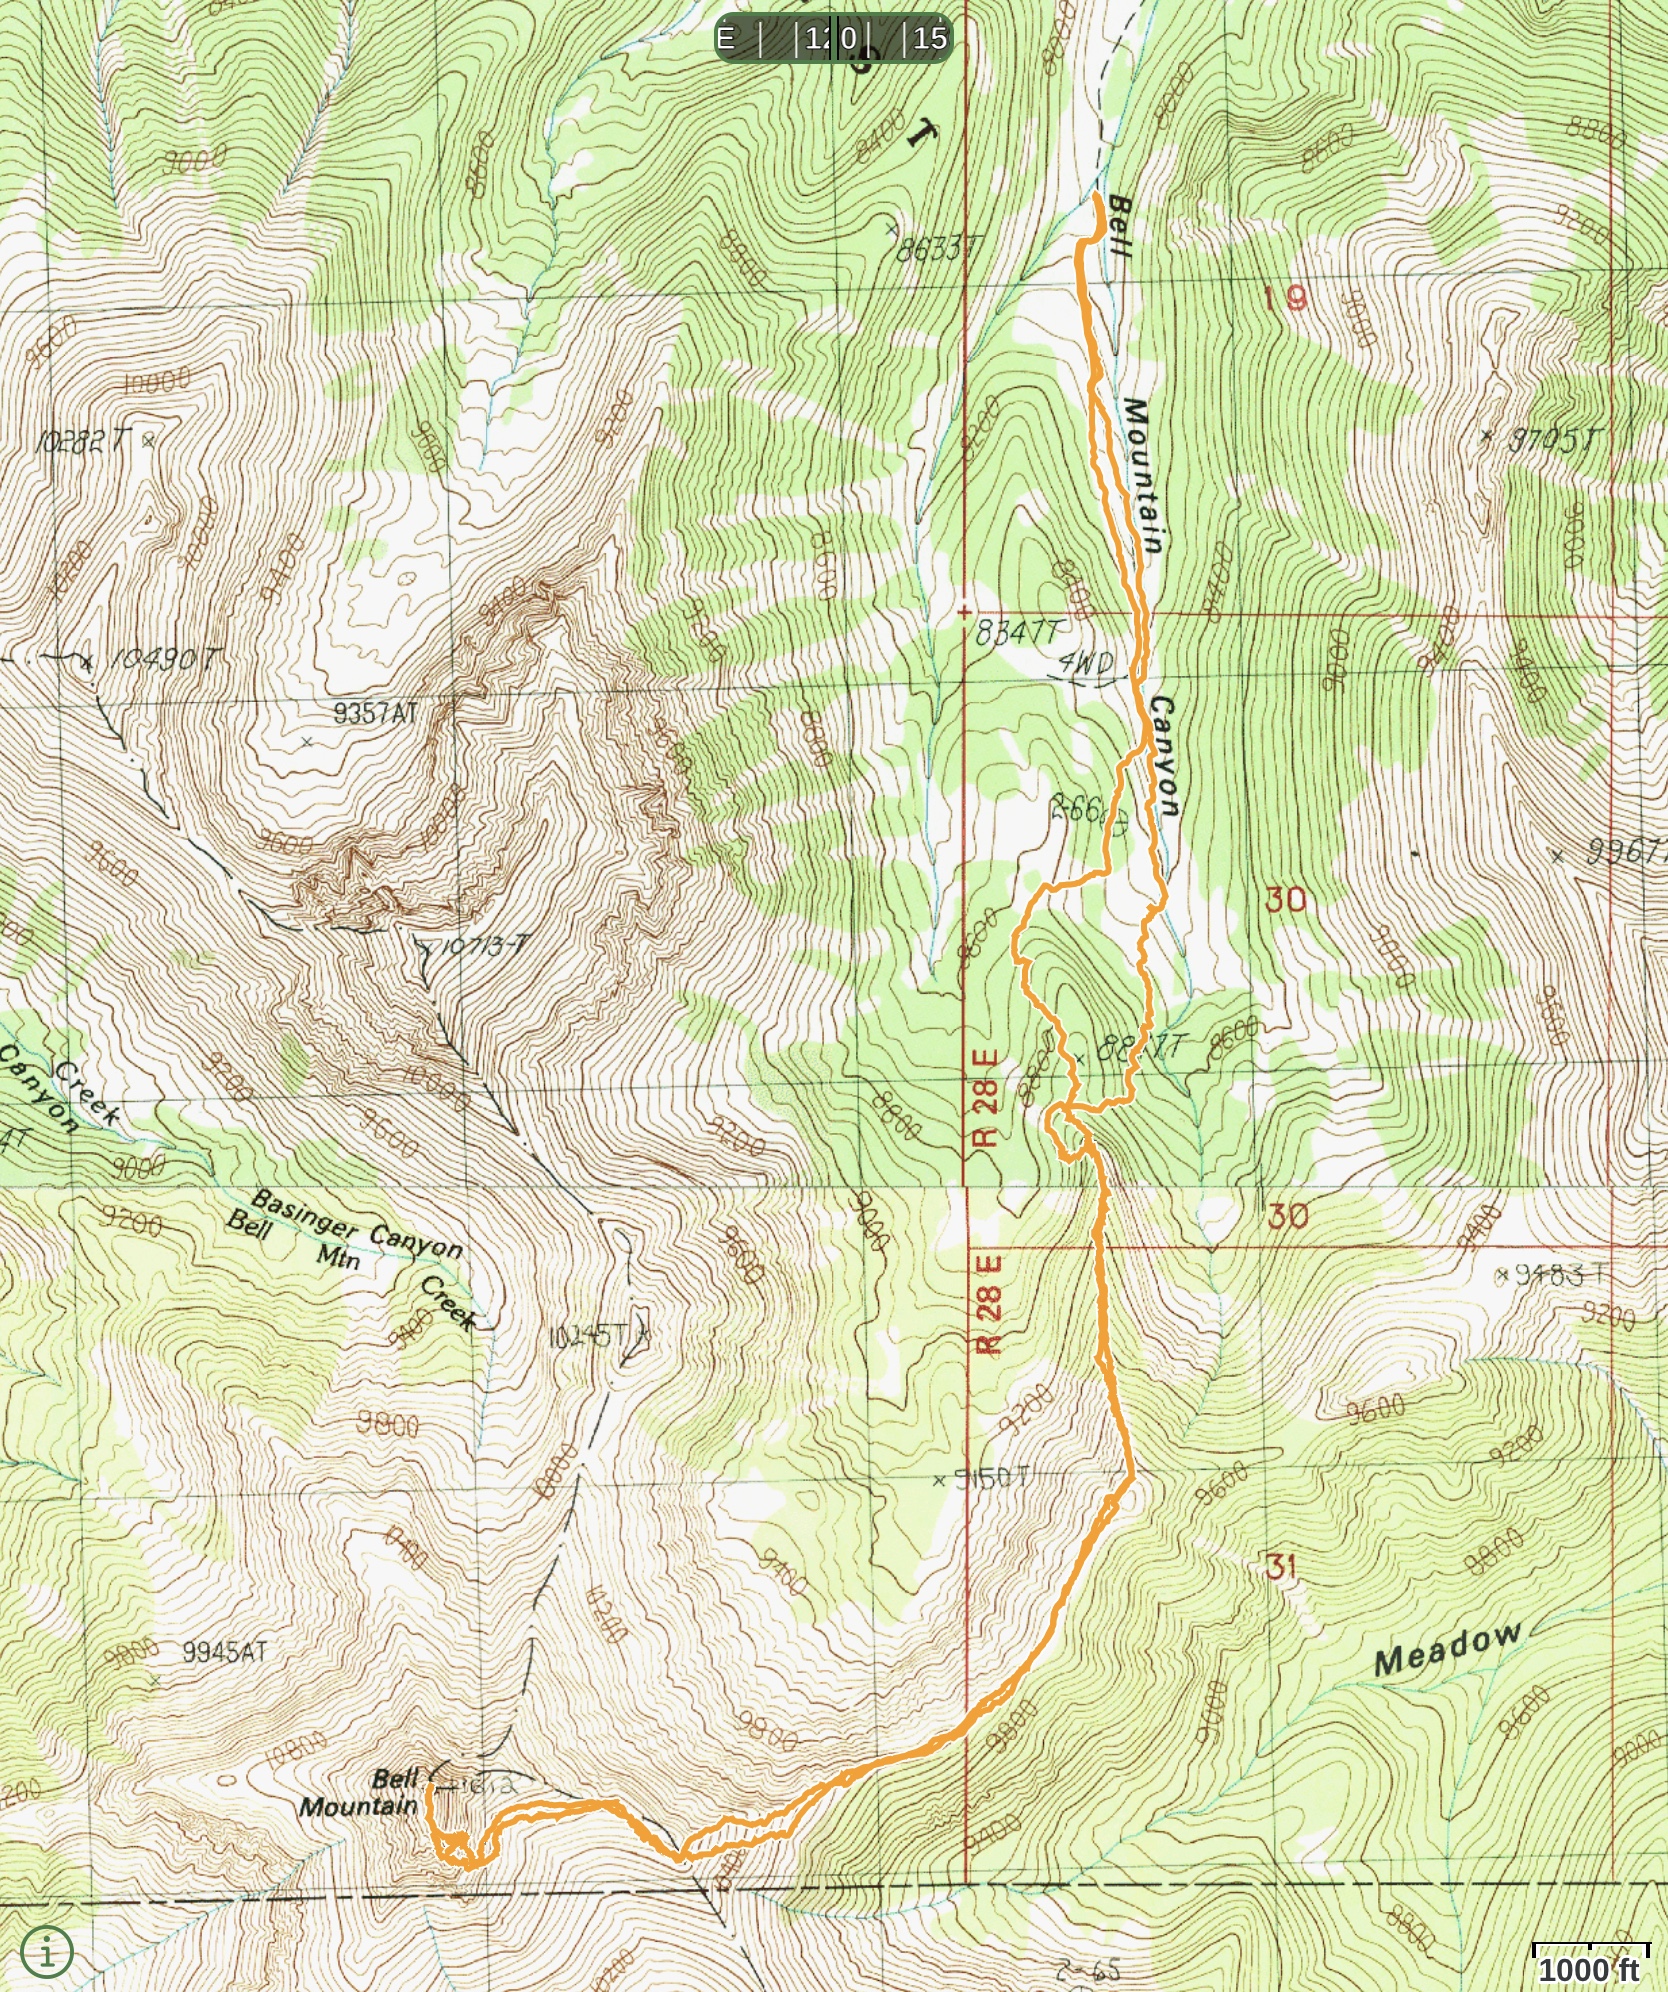 Clint’s GPS track. The route covered 8.8 miles round trip with 5,400 feet of gain.